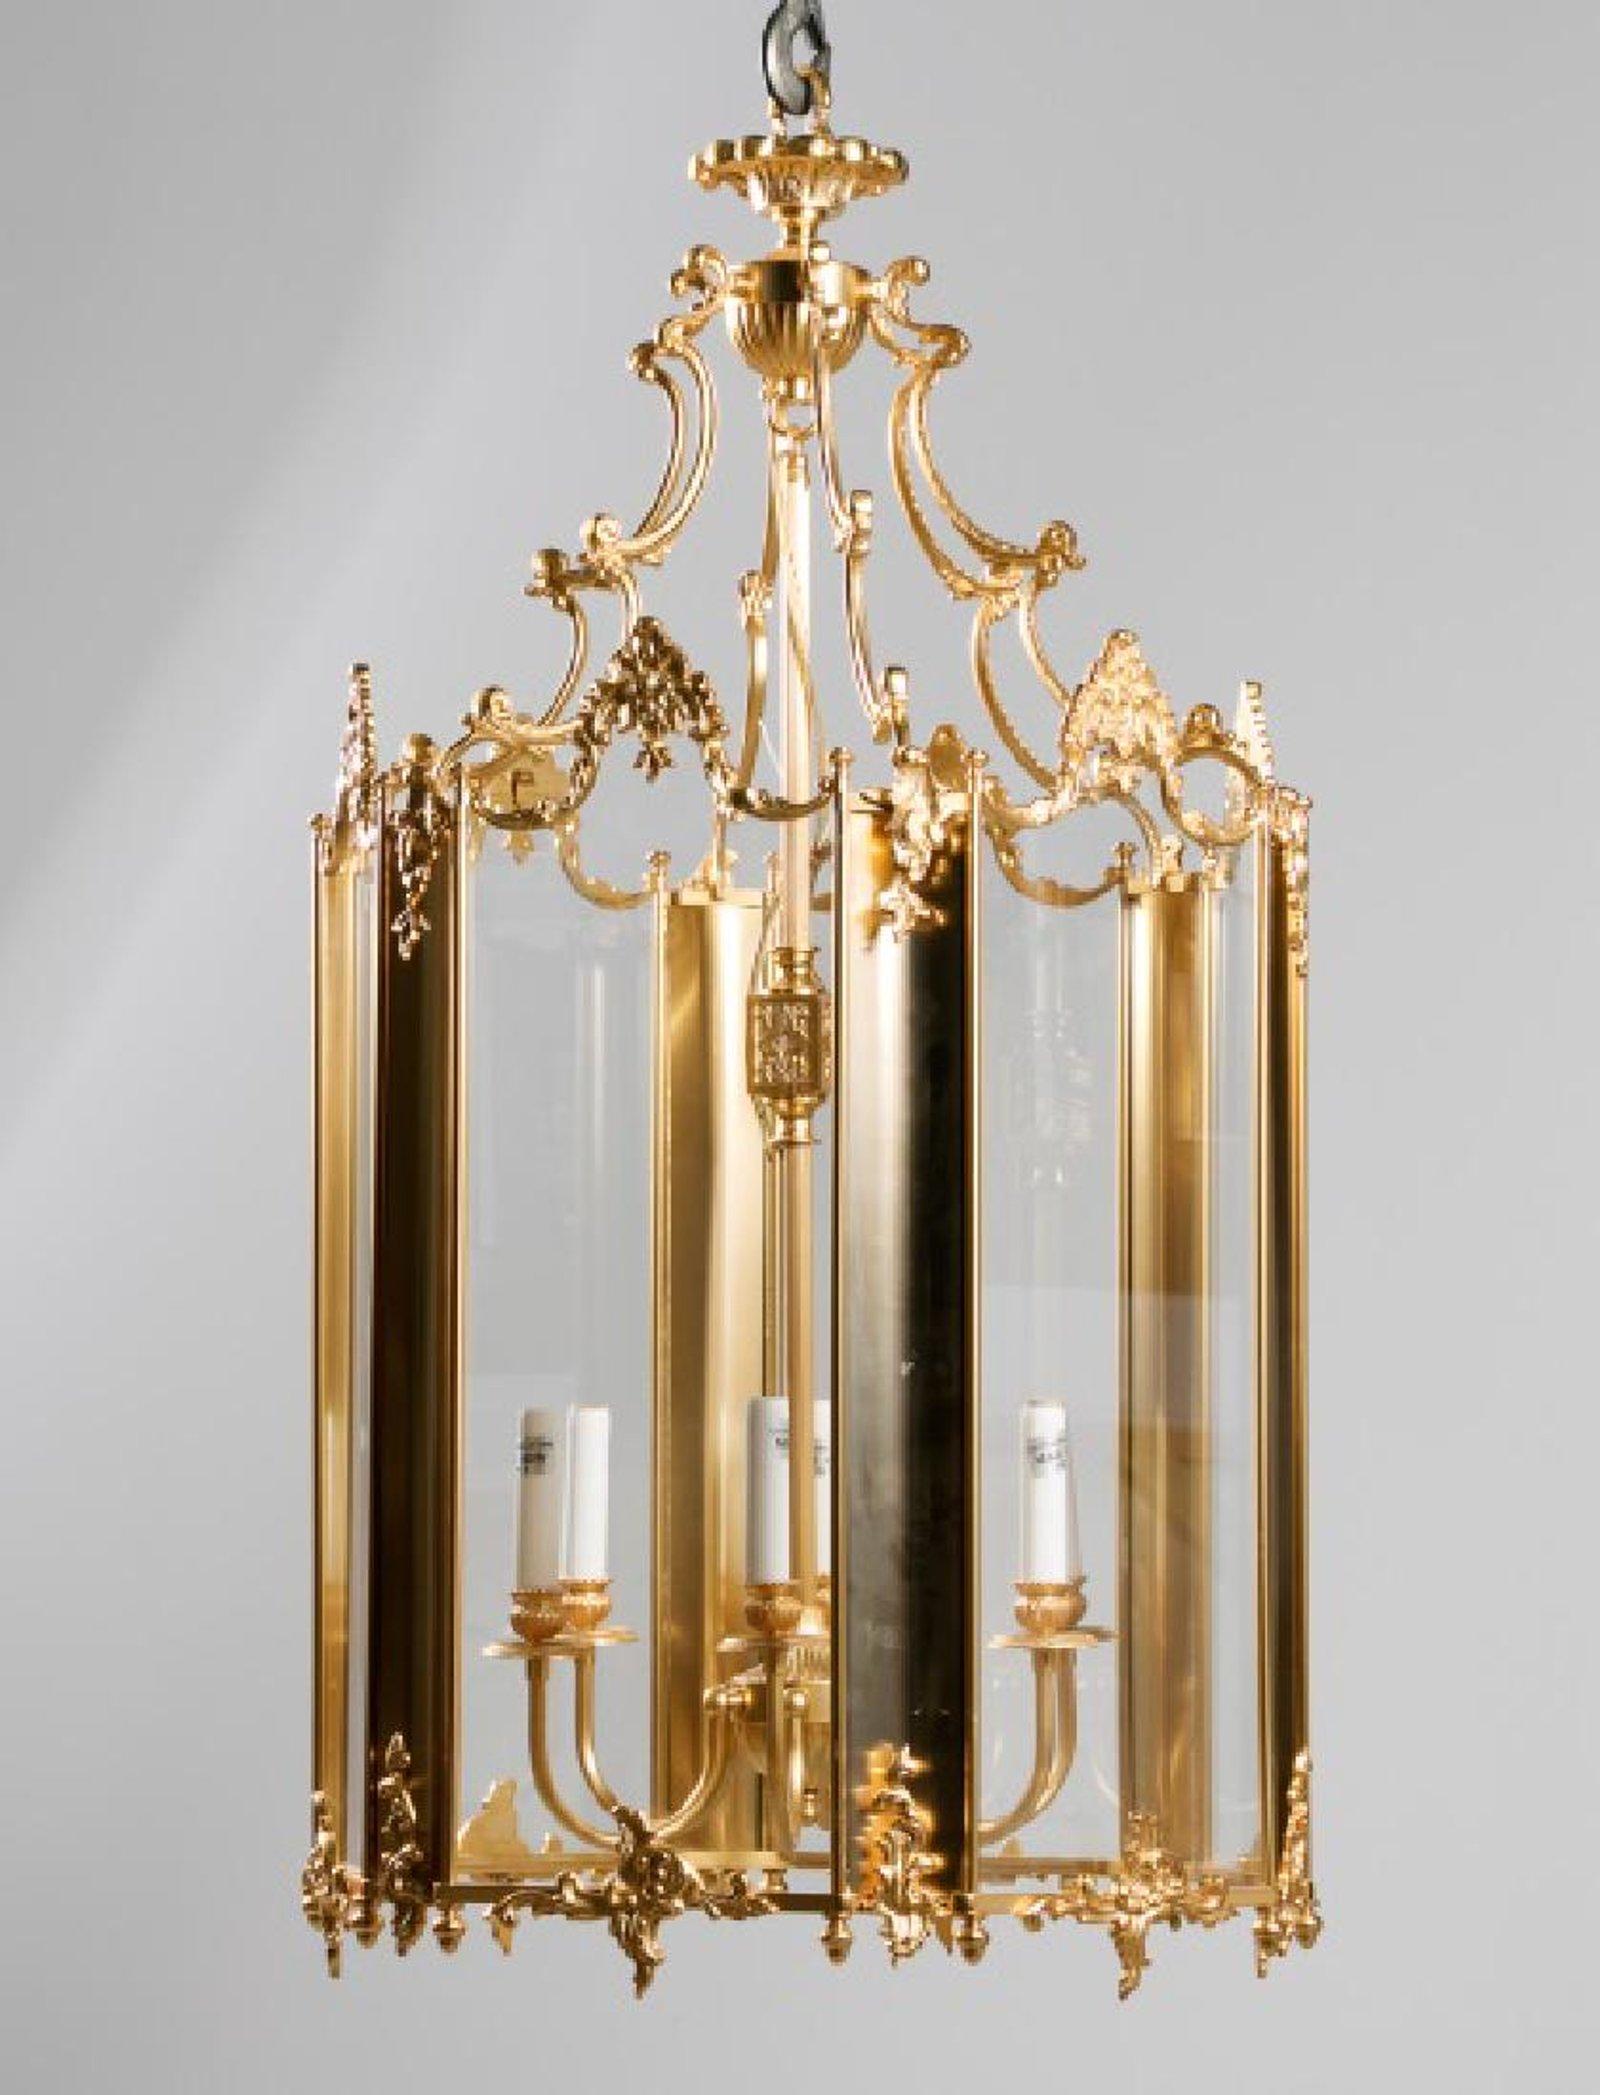 A large and impressive French Louis XVI style modern multi light gilt bronze and glass lantern chandelier of fine detail and quality.